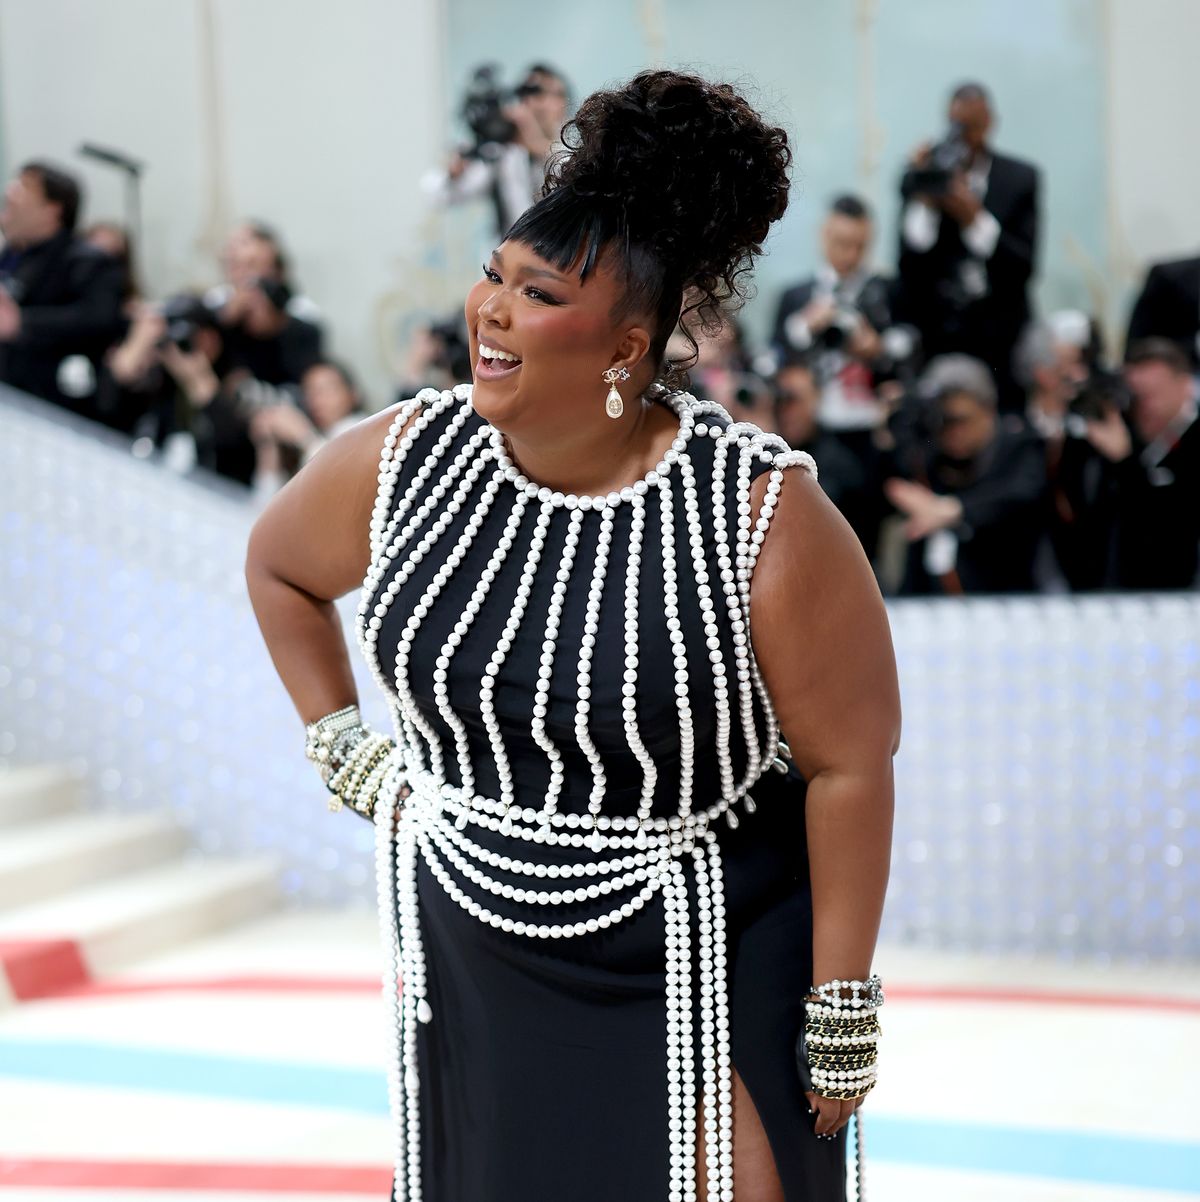 Lizzo Drips in Pearls at the 2023 Met Gala After Critiquing Last